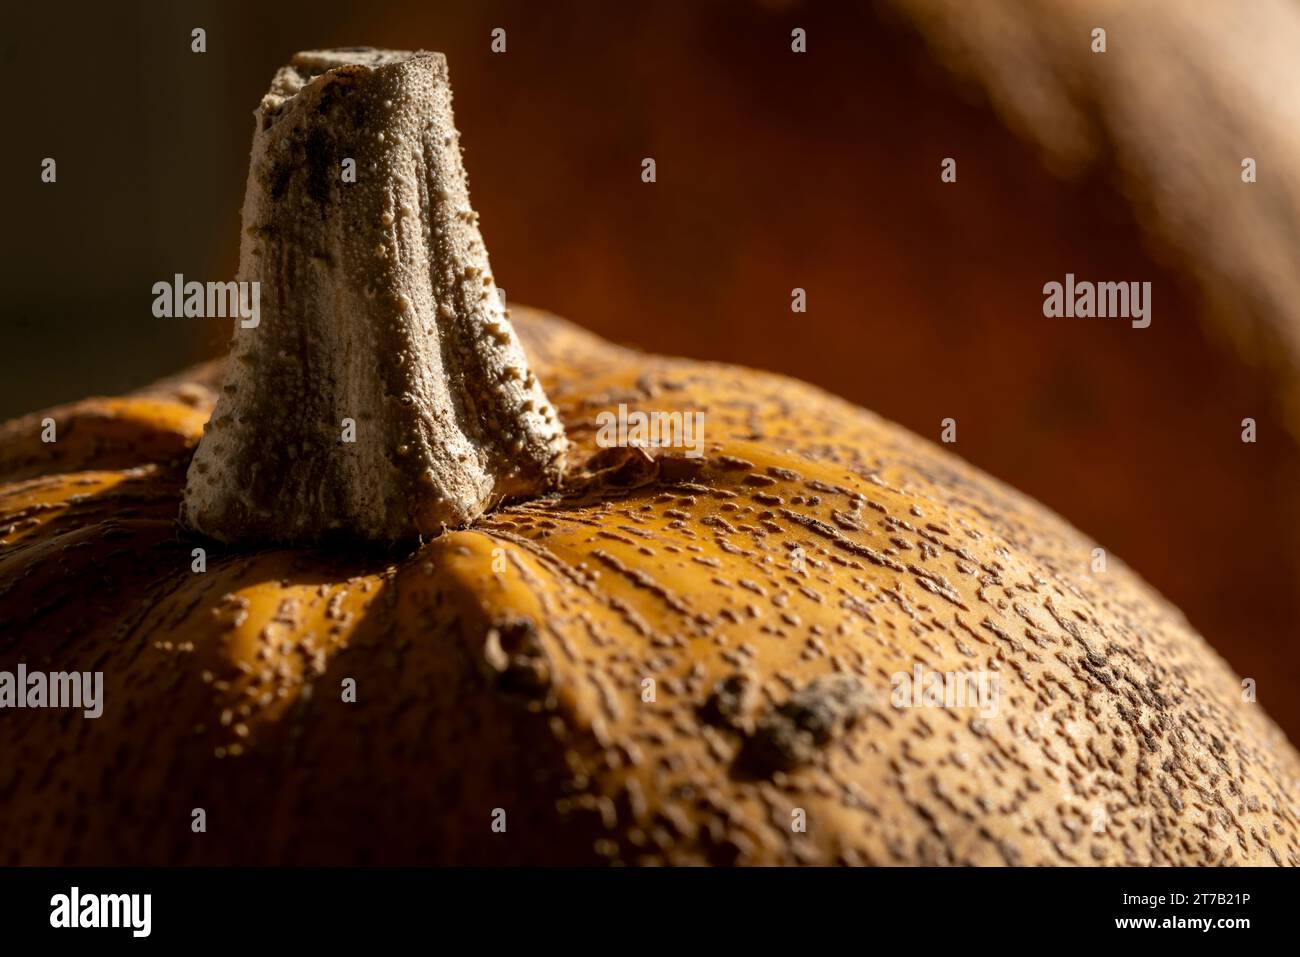 A cosy autumn scene features two vibrant orange pumpkins bathed in natural light, resting on a windowsill. The warm glow enhances the seasonal charm, Stock Photo